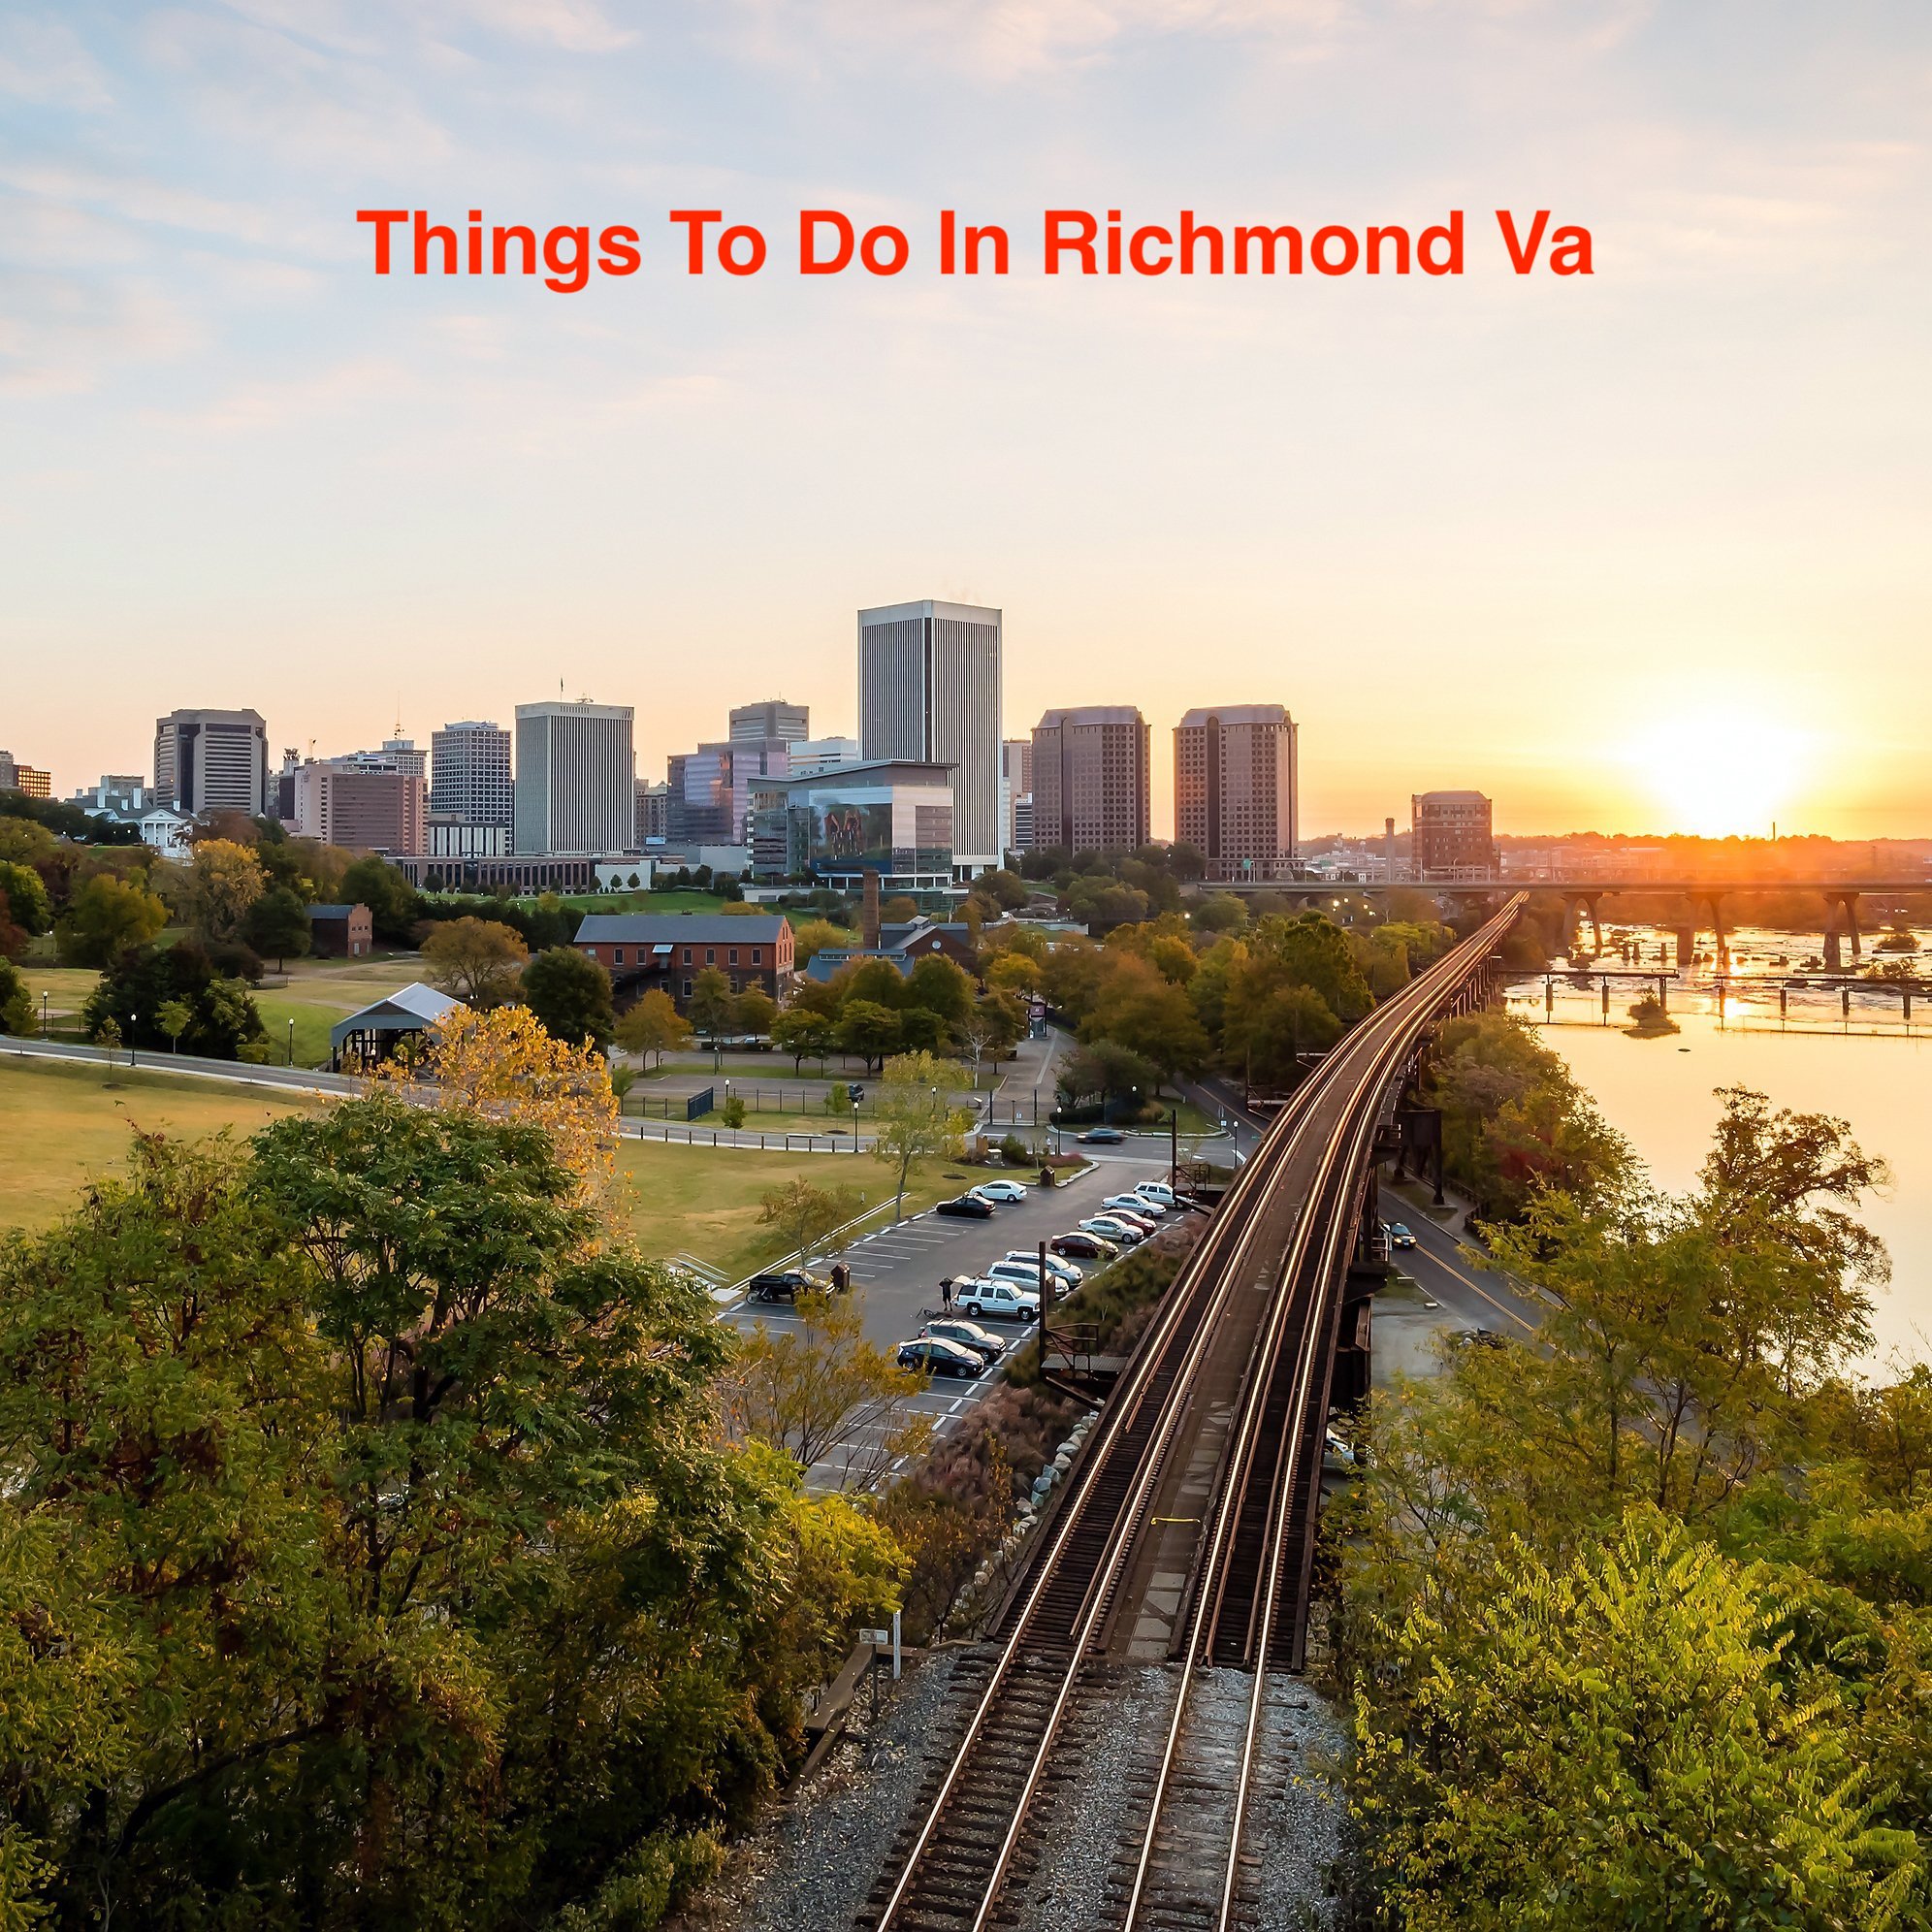 Things To Do In Richmond Virginia